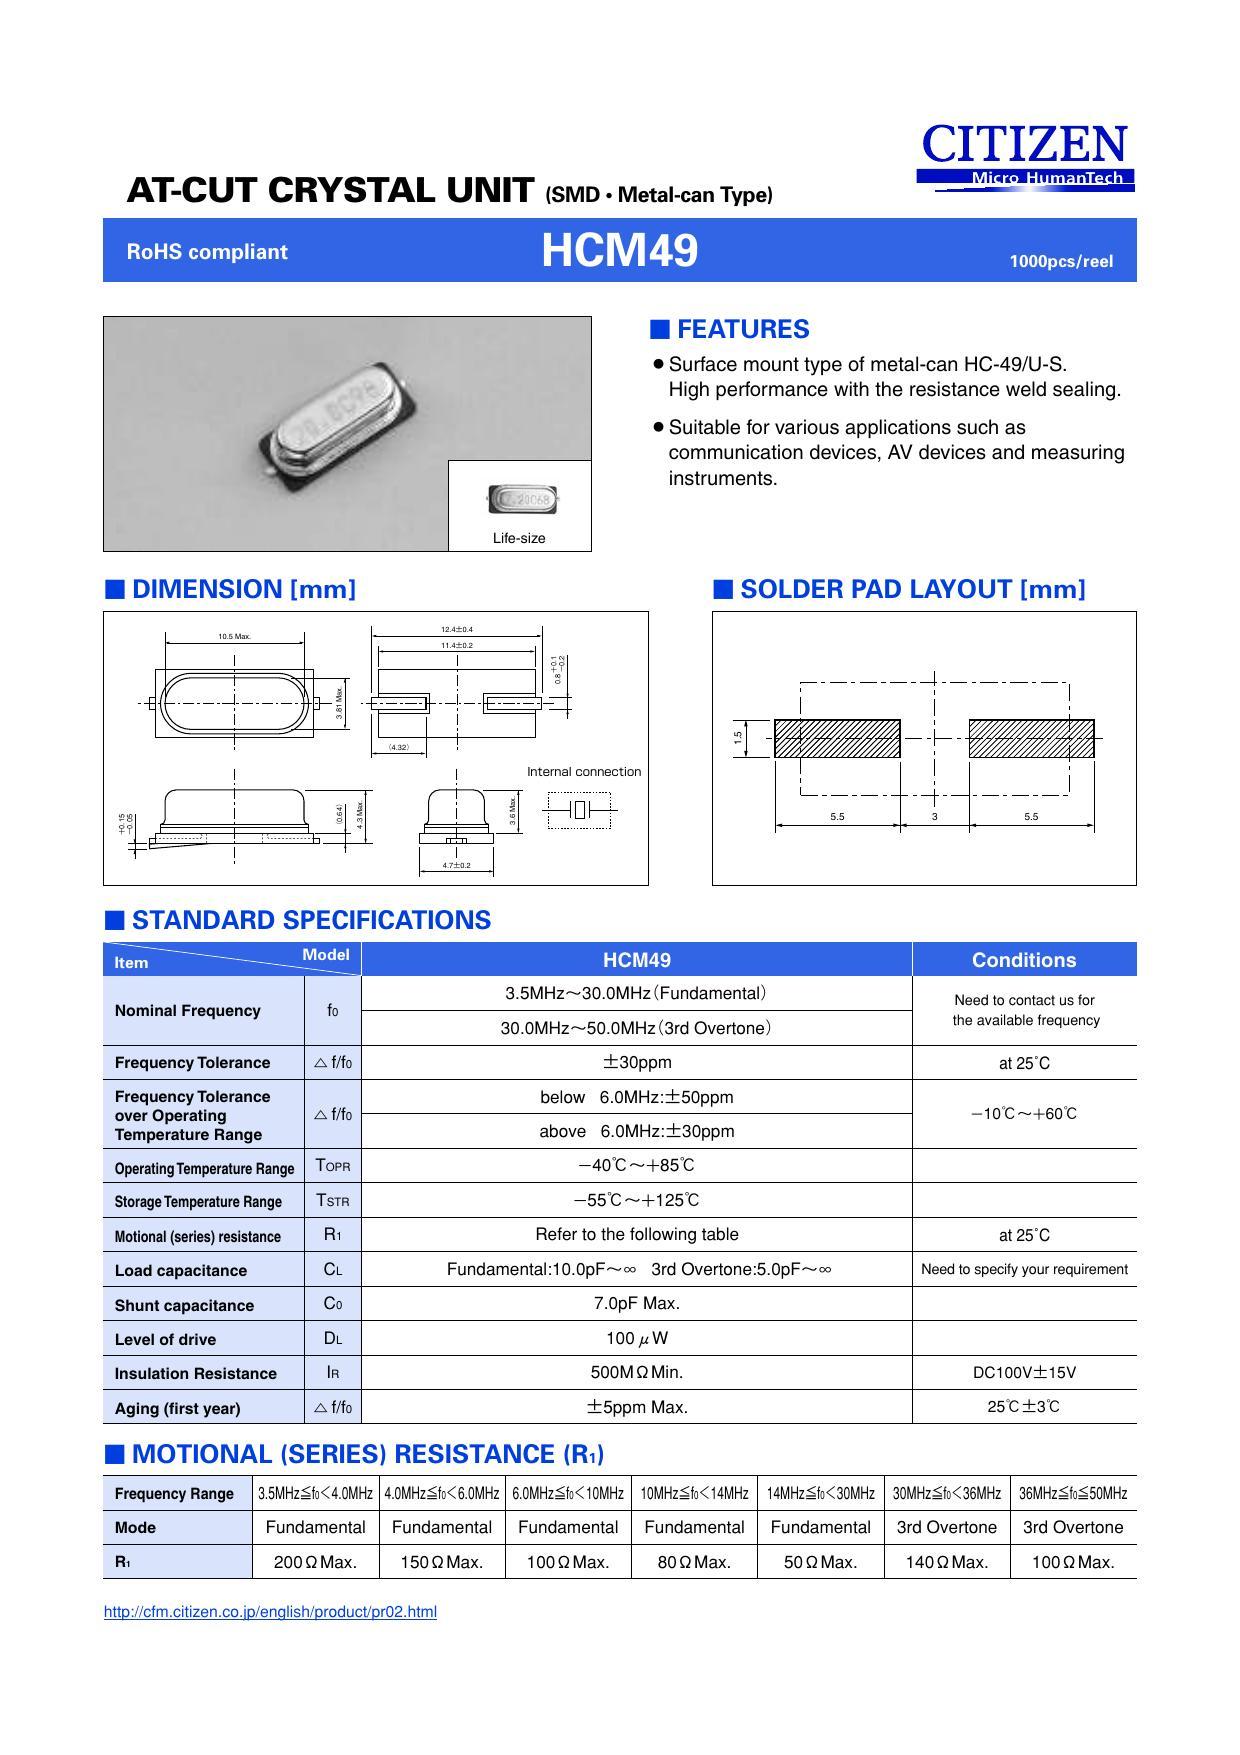 citizen-microhumantech-atcut-crystal-unit-smd-metal-can-type-rohs-compliant-hcm49.pdf